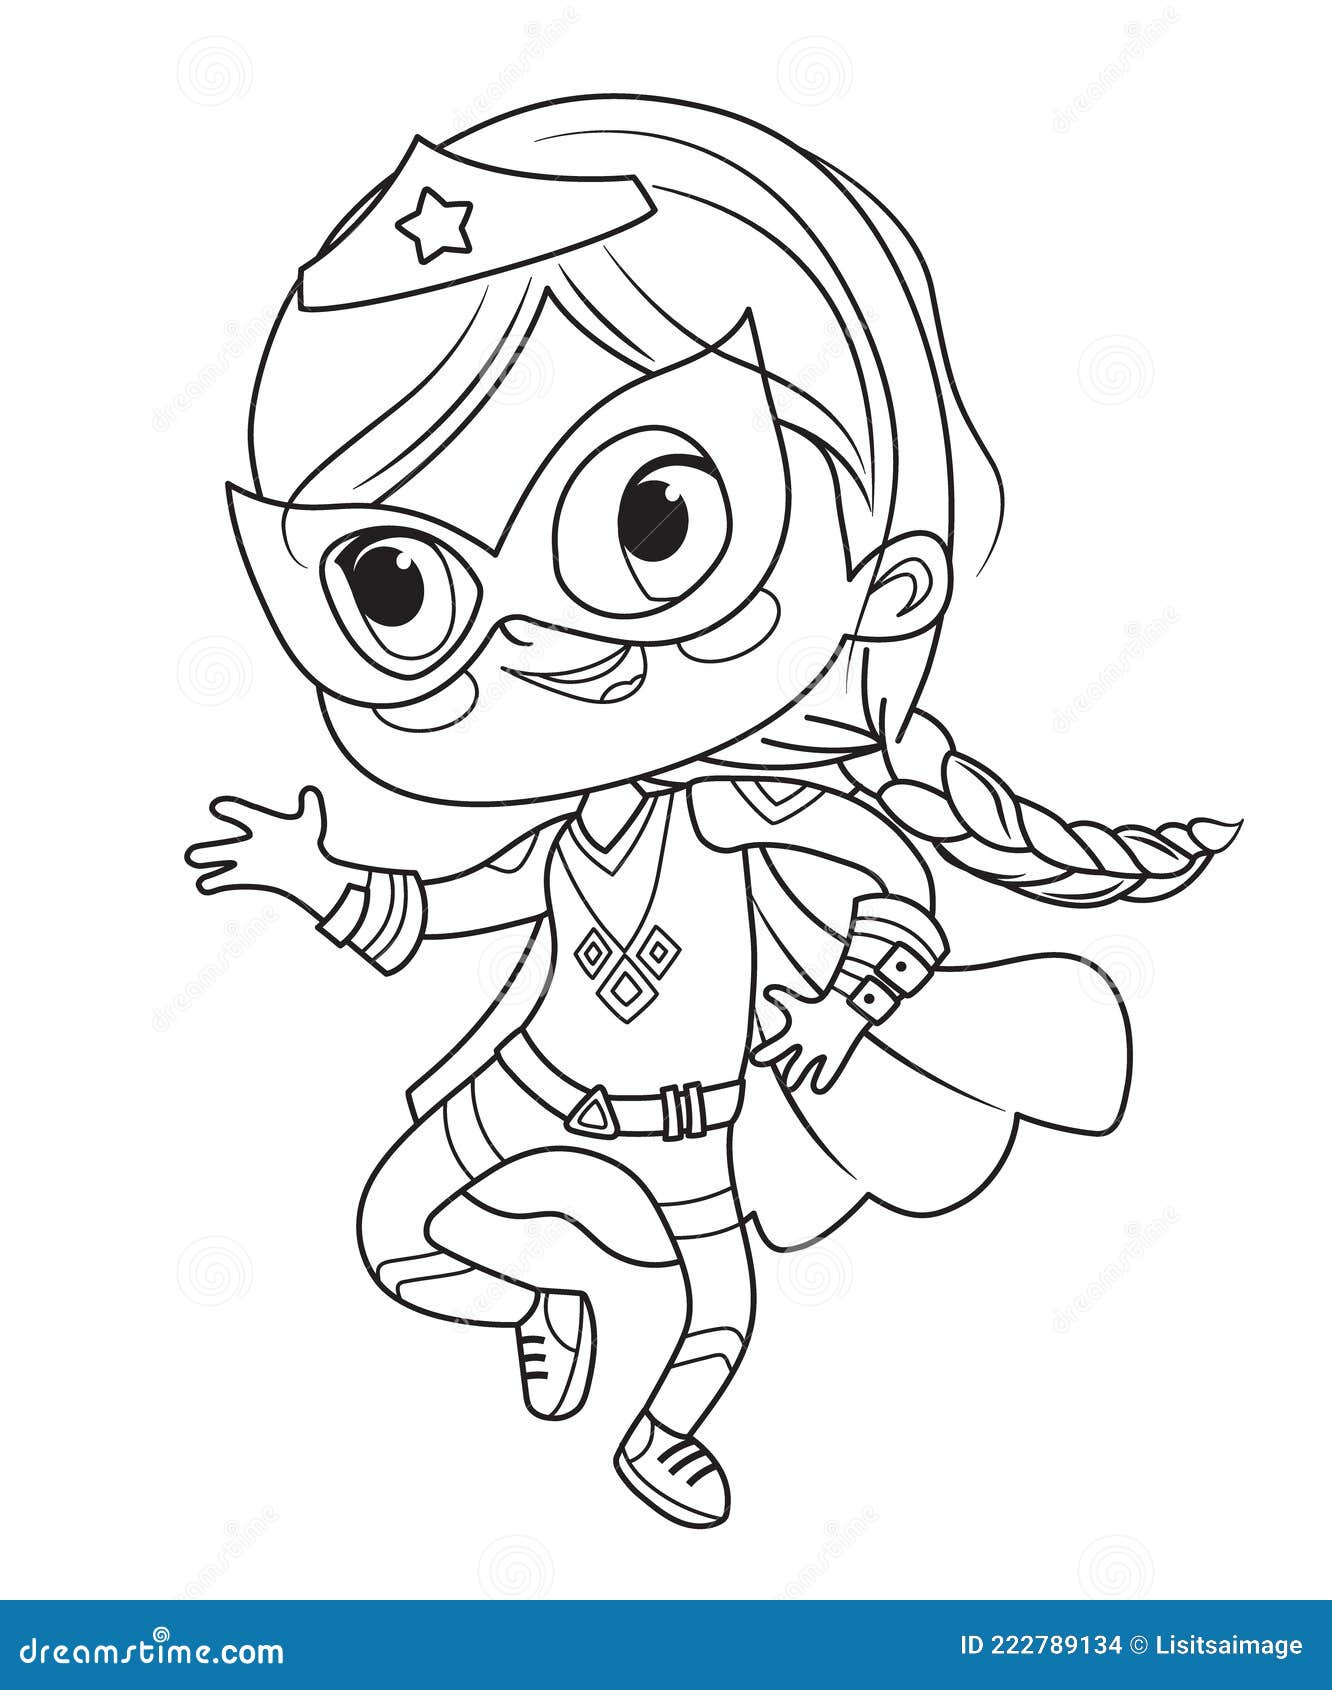 all kinds of superheroes coloring pages